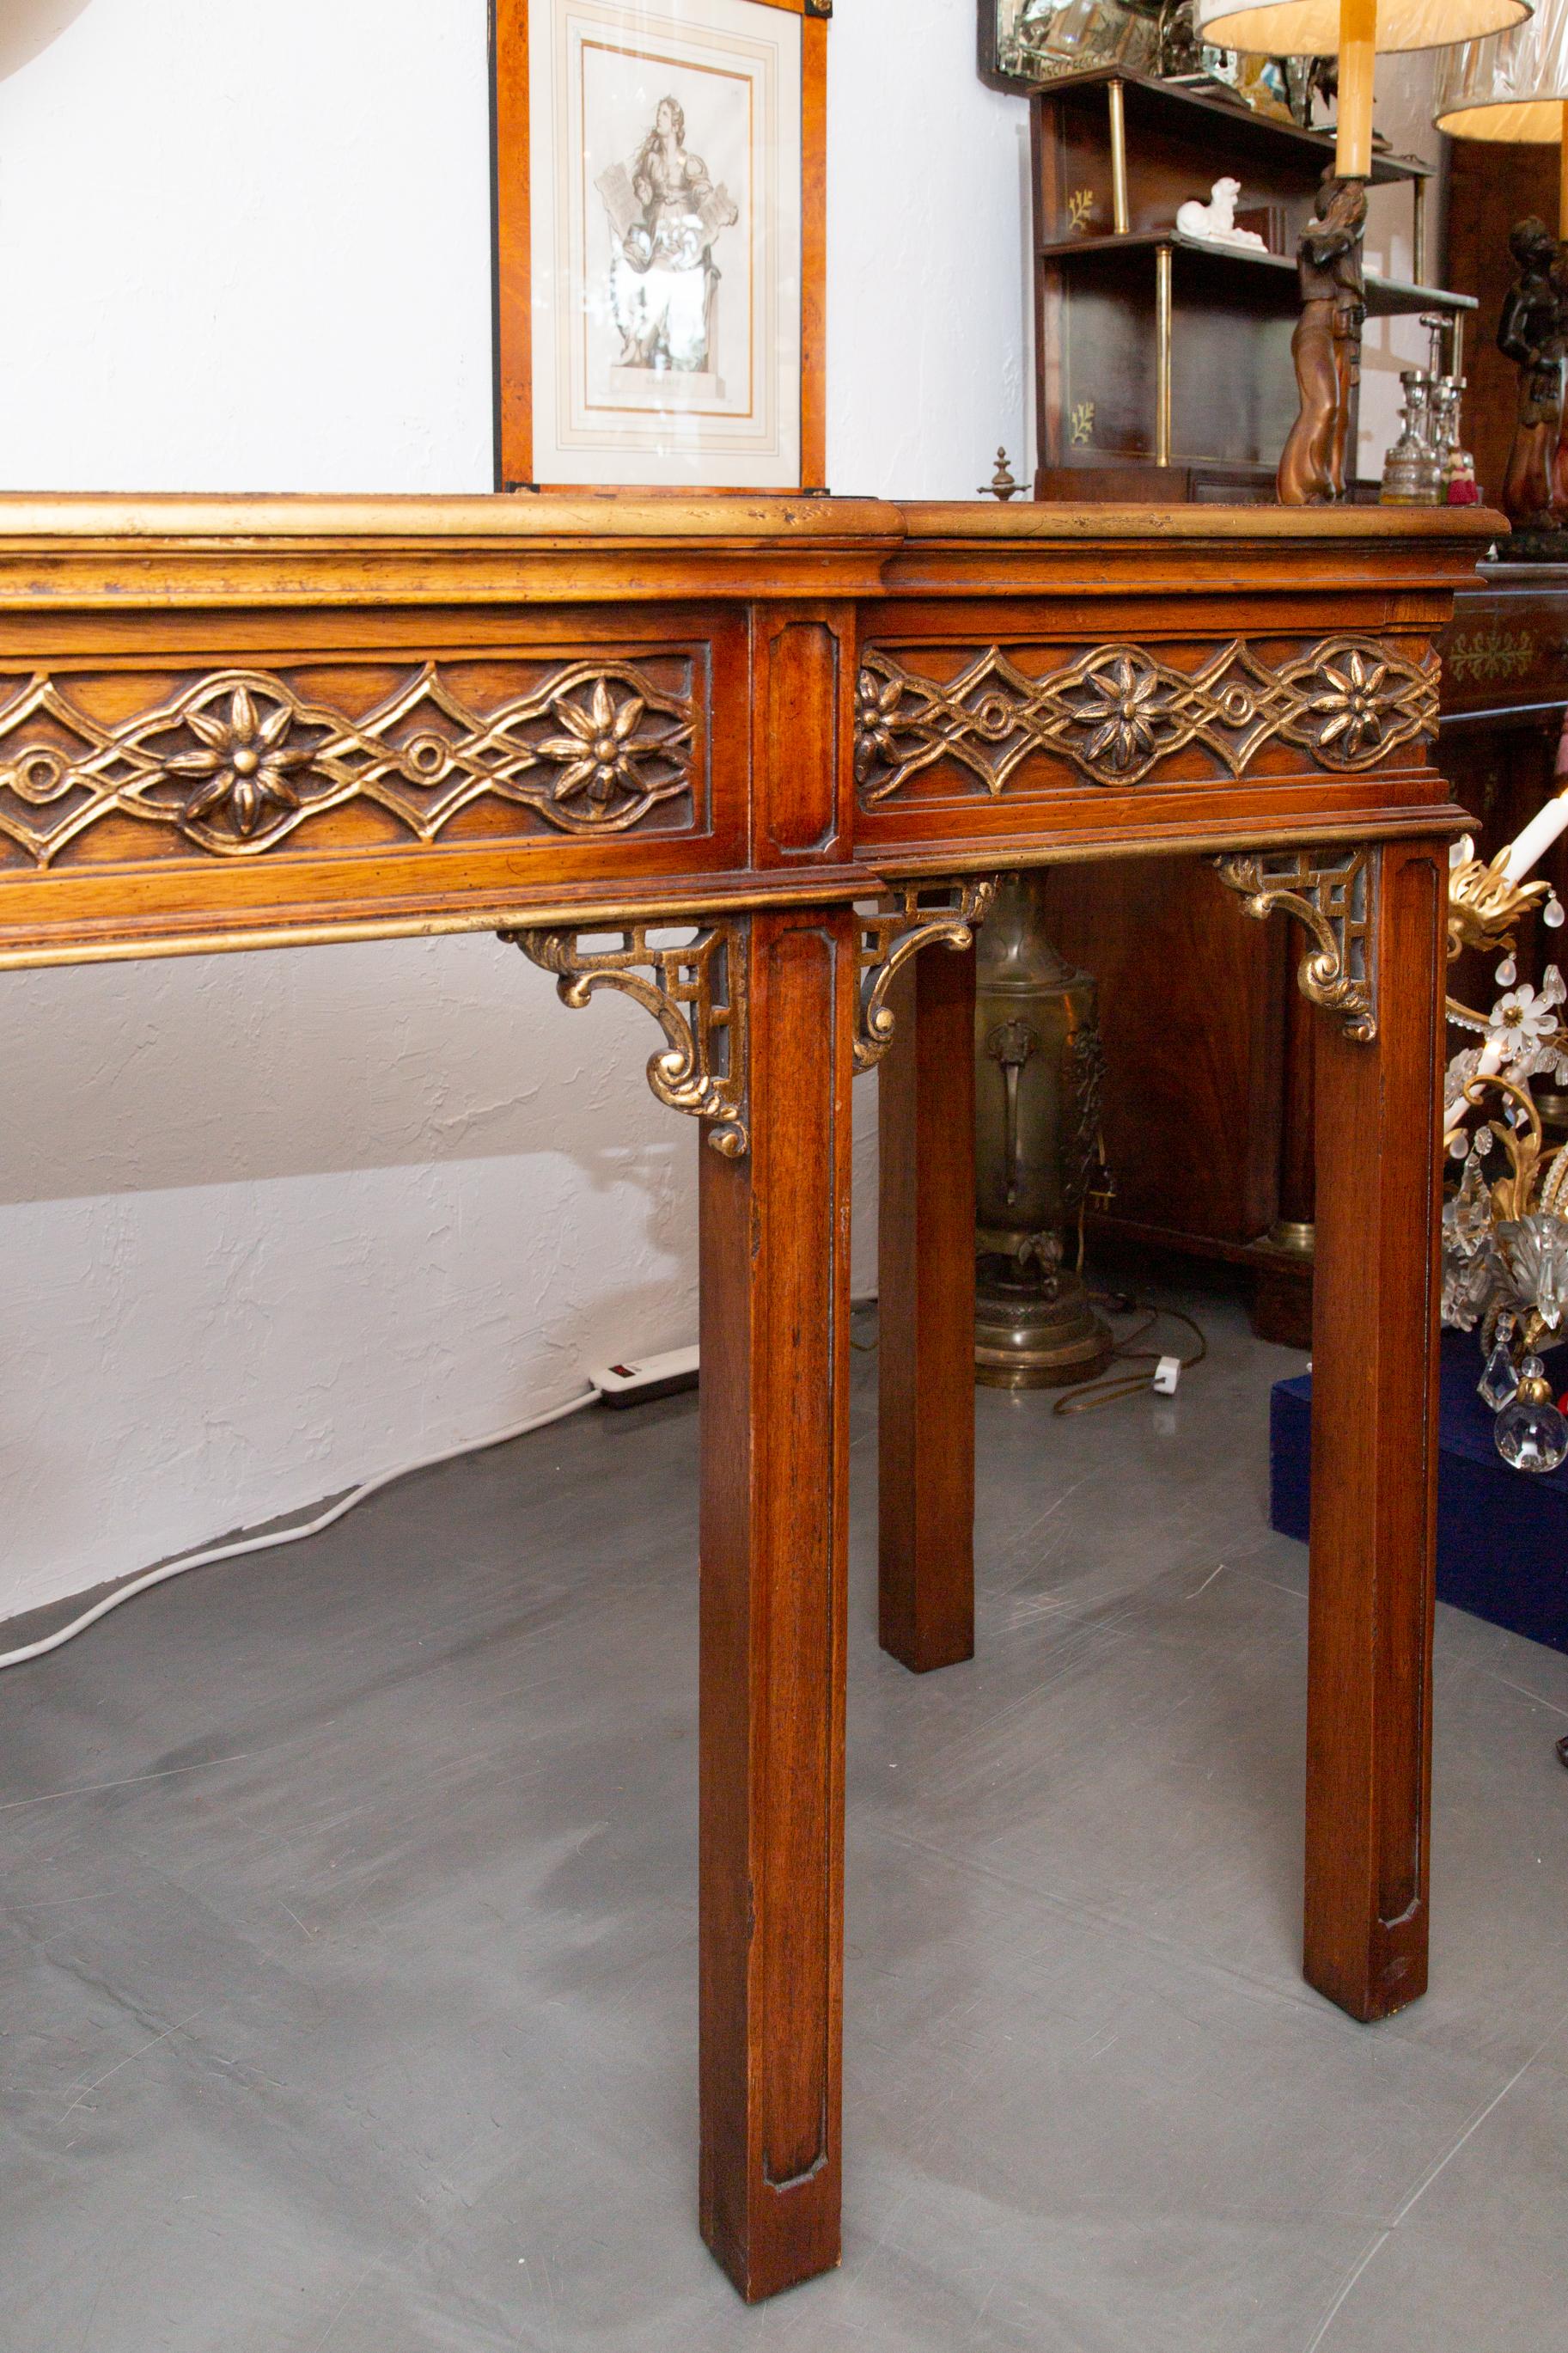 This is a very stately Chinese Chippendale style walnut and parcel gilt console or sofa table. It’s very traditional, but the parcel gilt and Chinese Chippendale fret work give the piece punch.